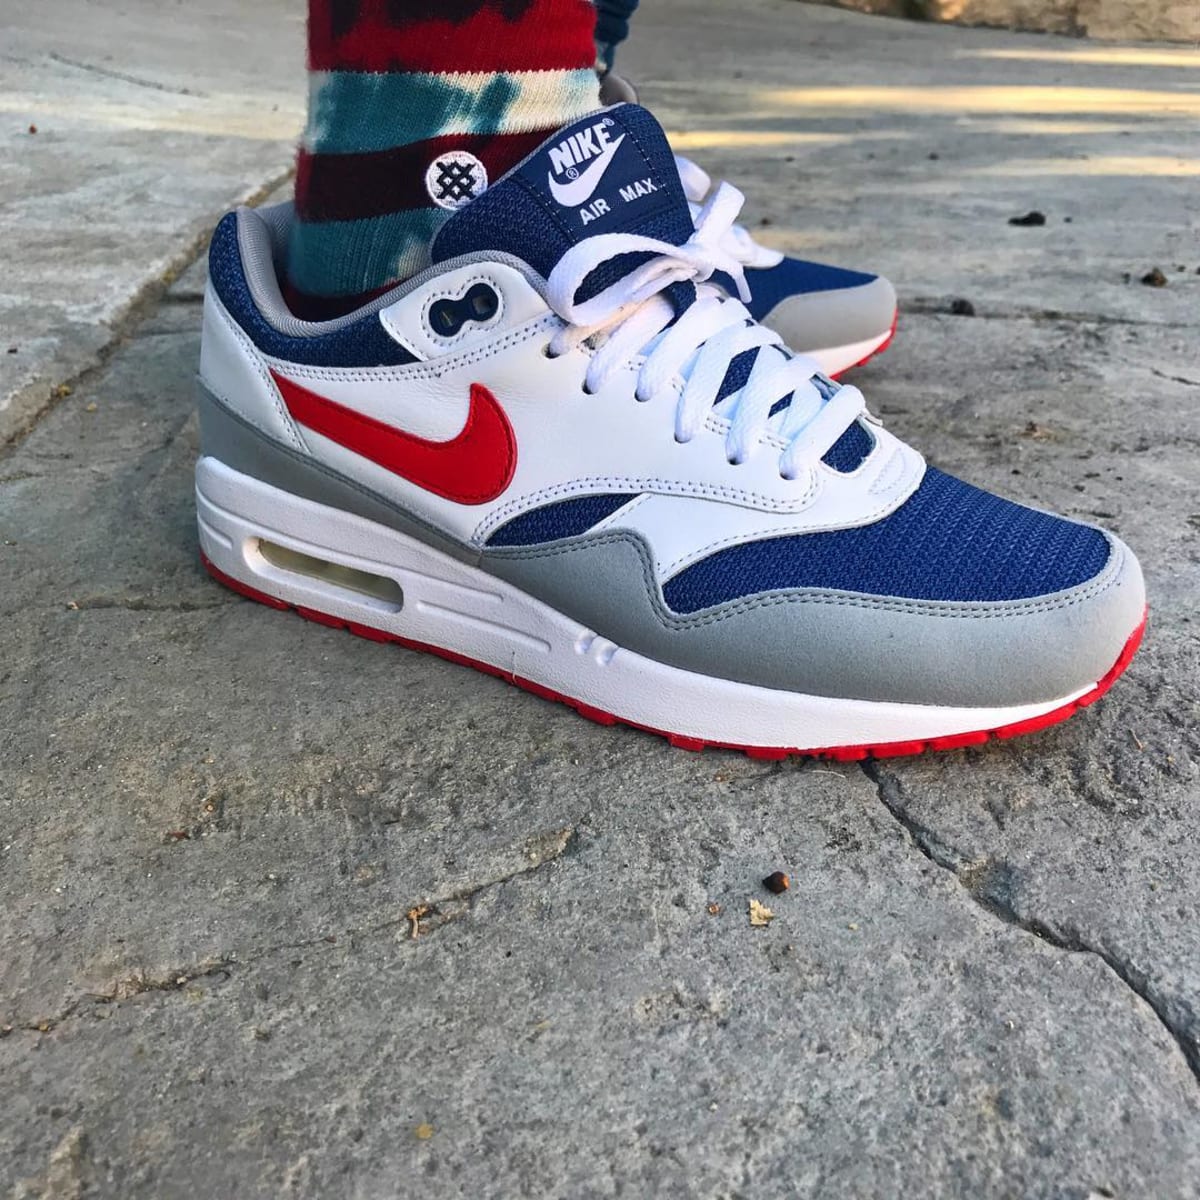 NIKEiD Air Max 1 USA - NIKEiD Nike By You USA Designs | Sole Collector